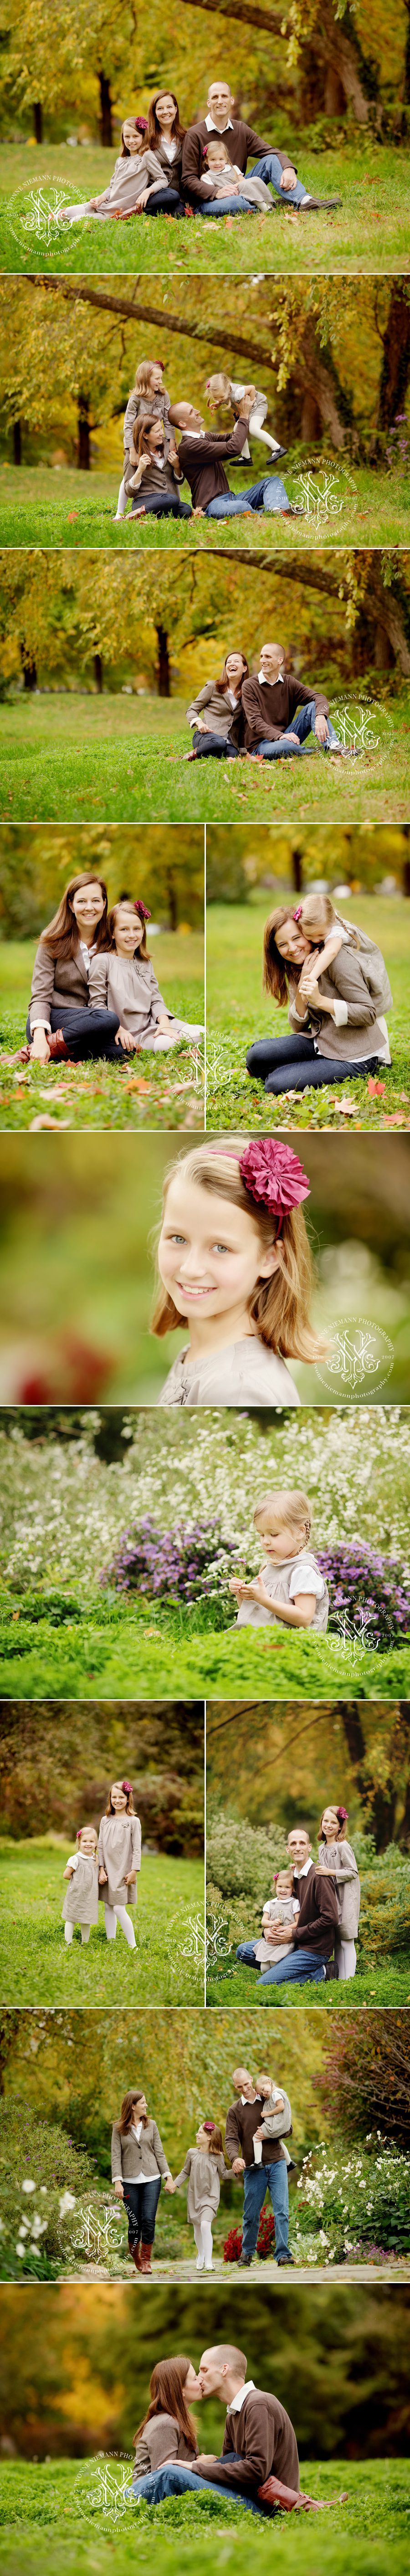 Pretty Autumn family portraits at a park in St. Louis taken by Yvonne Niemann Photography.